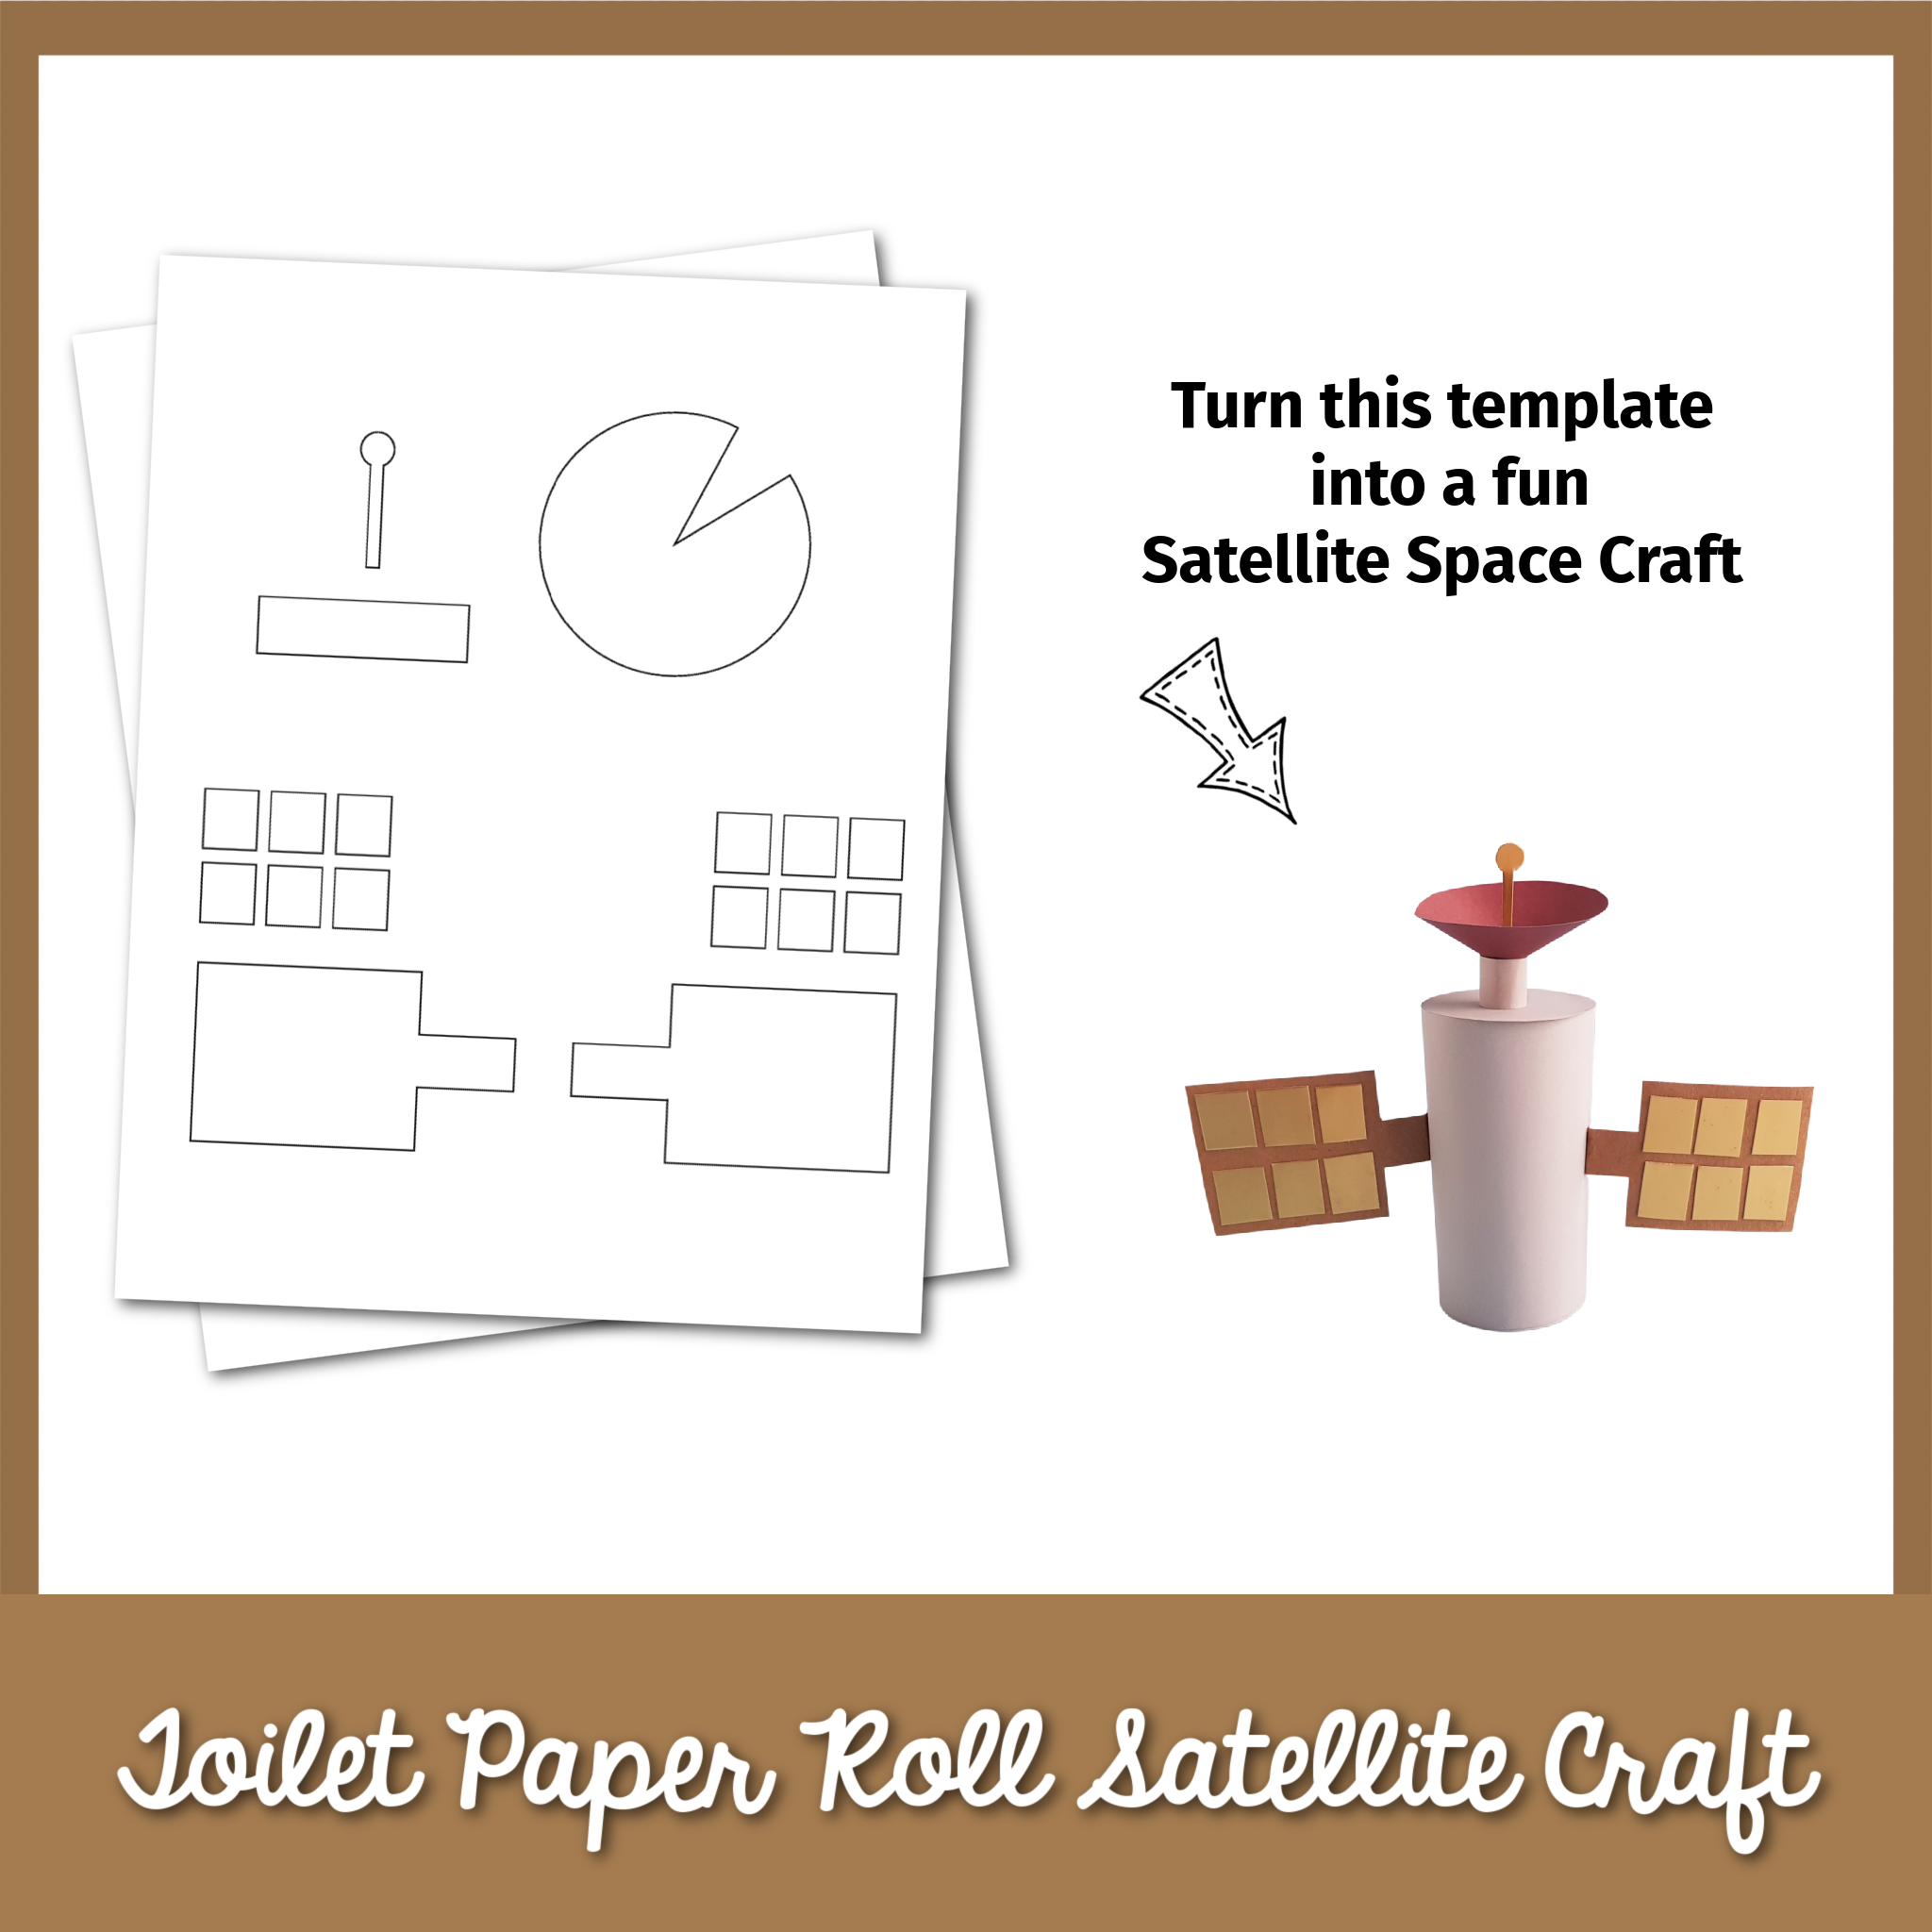 Toilet Paper Roll Satellite Craft Template